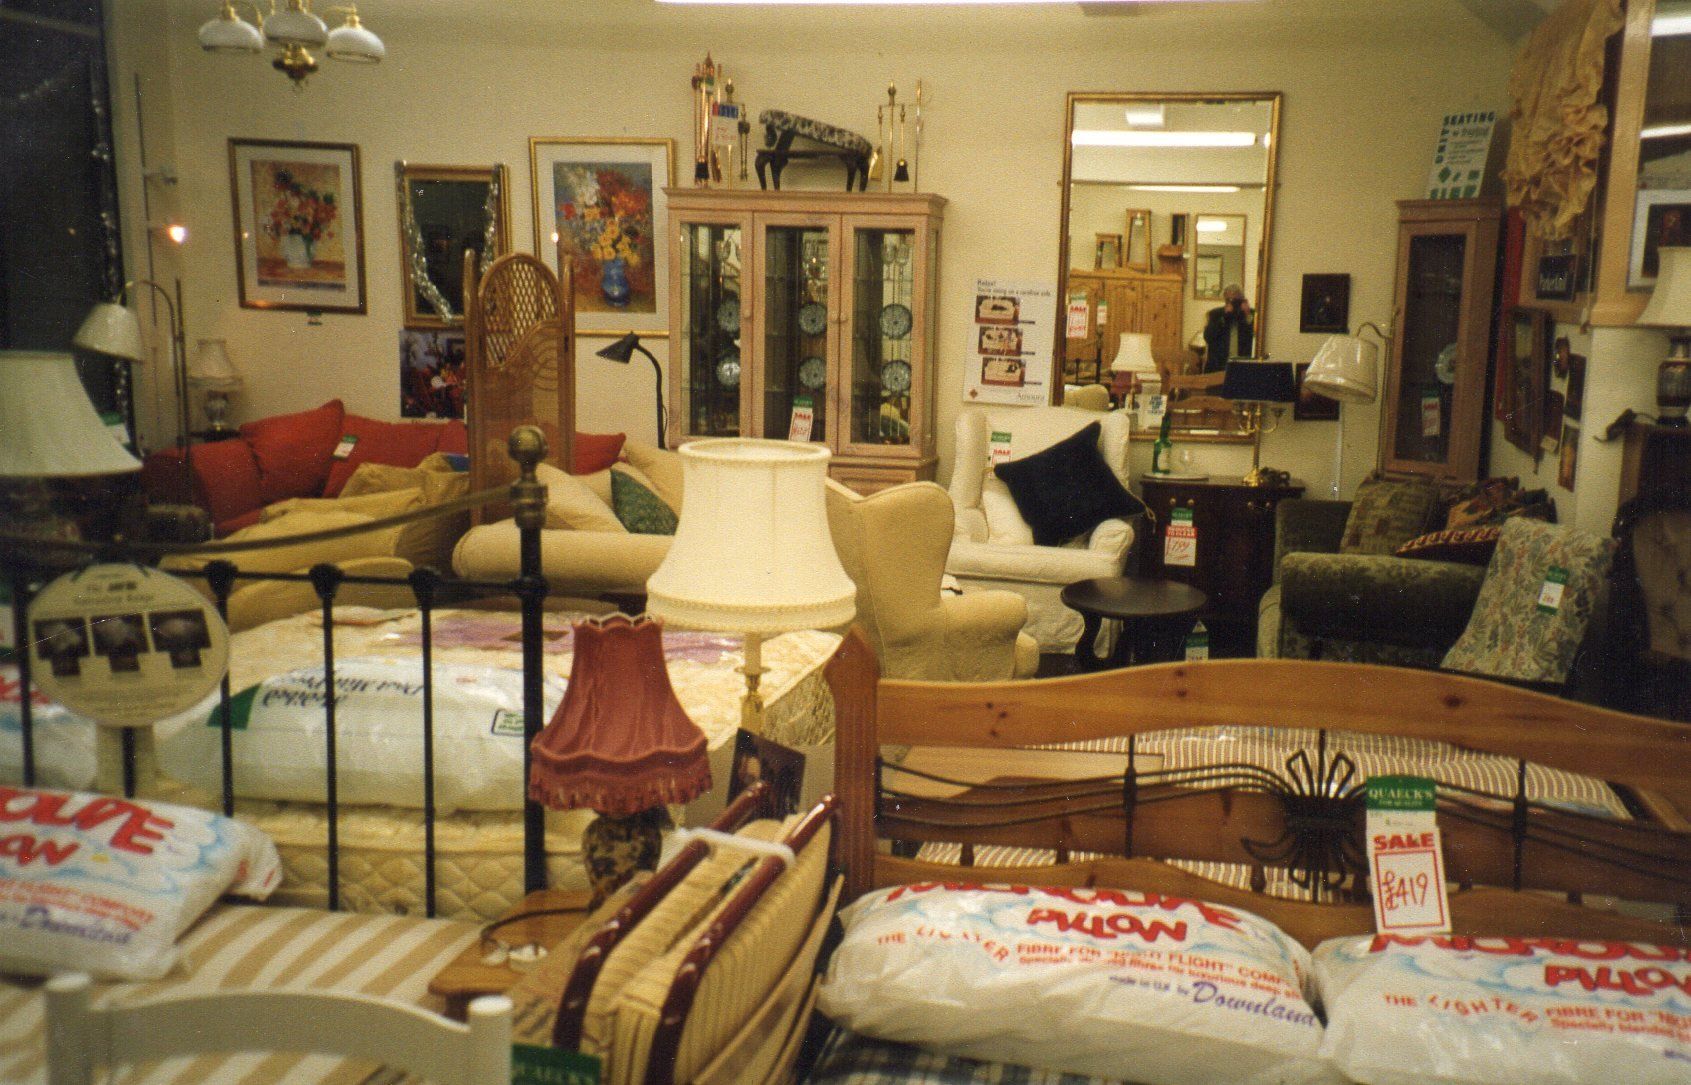 Bed and chairs on display at Quaeck's